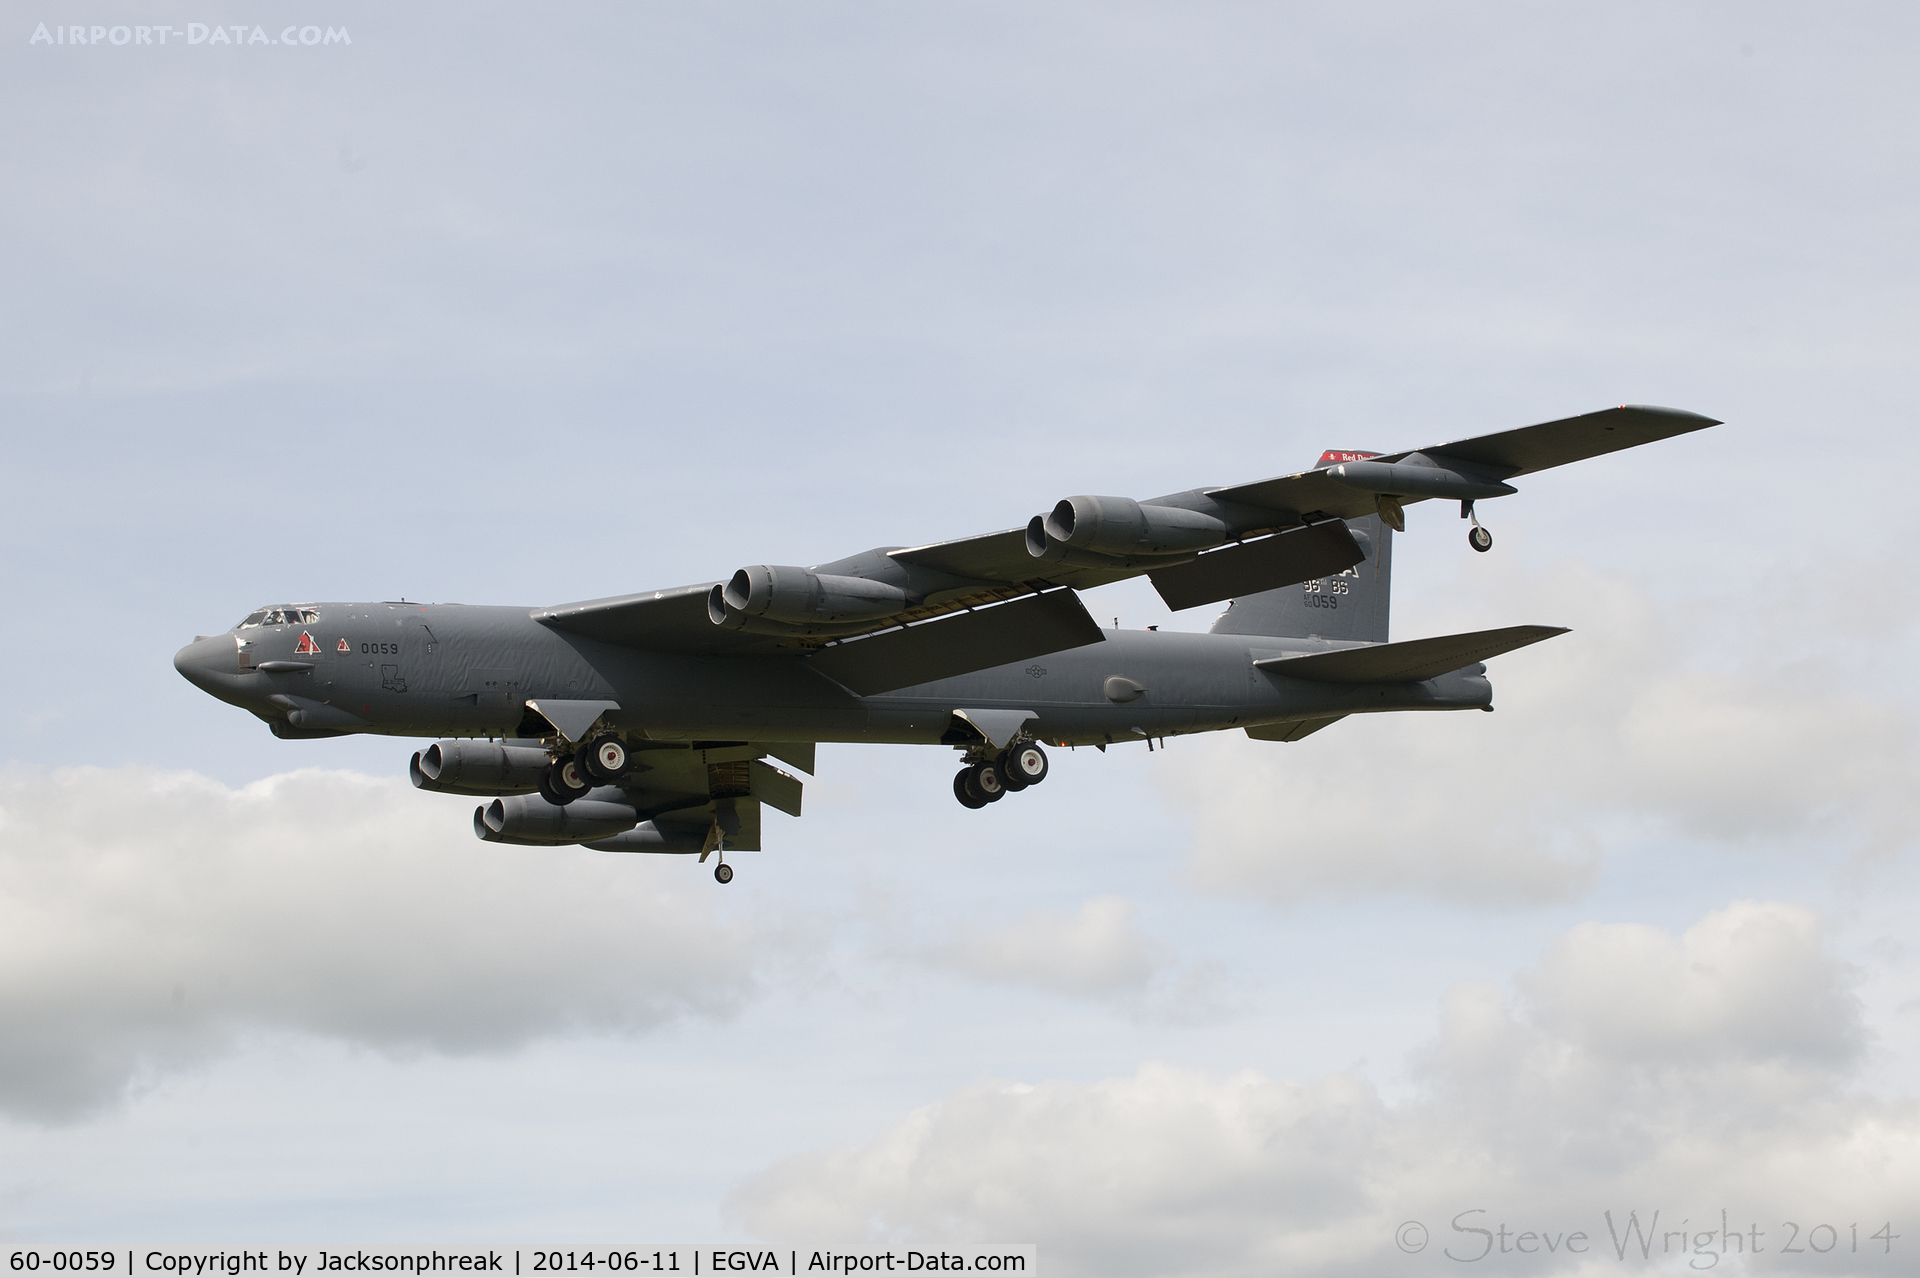 60-0059, 1960 Boeing B-52H Stratofortress C/N 464424, On finals at RAF Fairford, UK